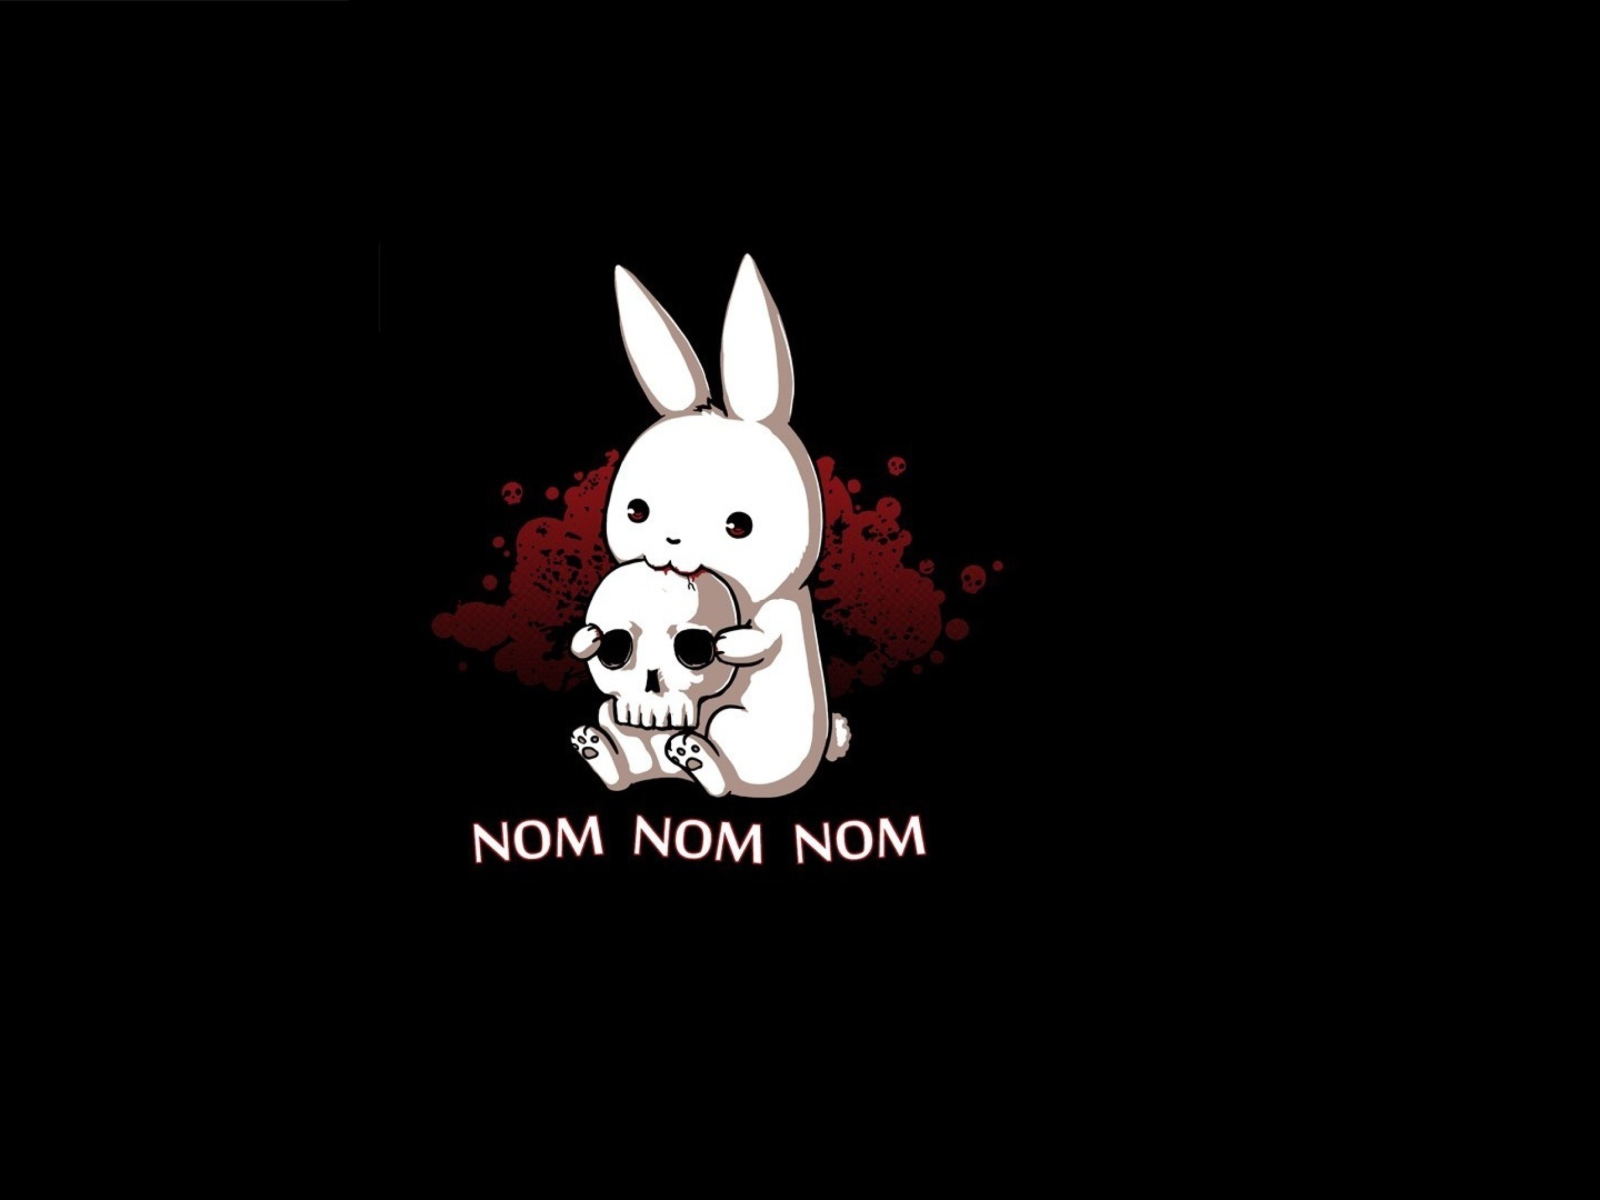 Blood-Thirsty Hare wallpaper 1600x1200